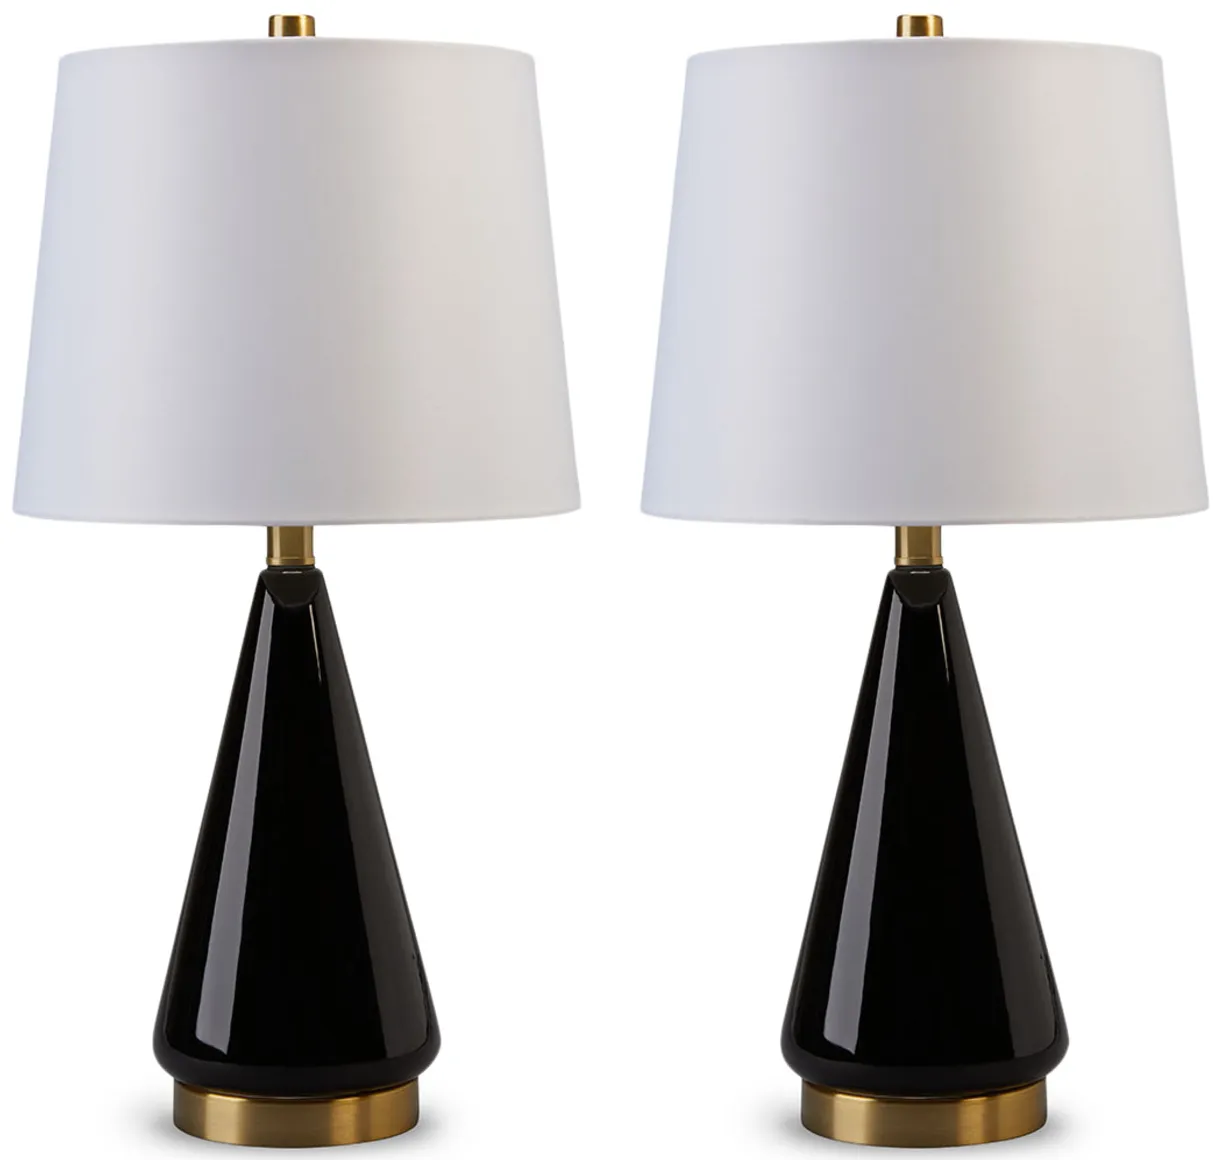 Set of 2 Actsen Table Lamps